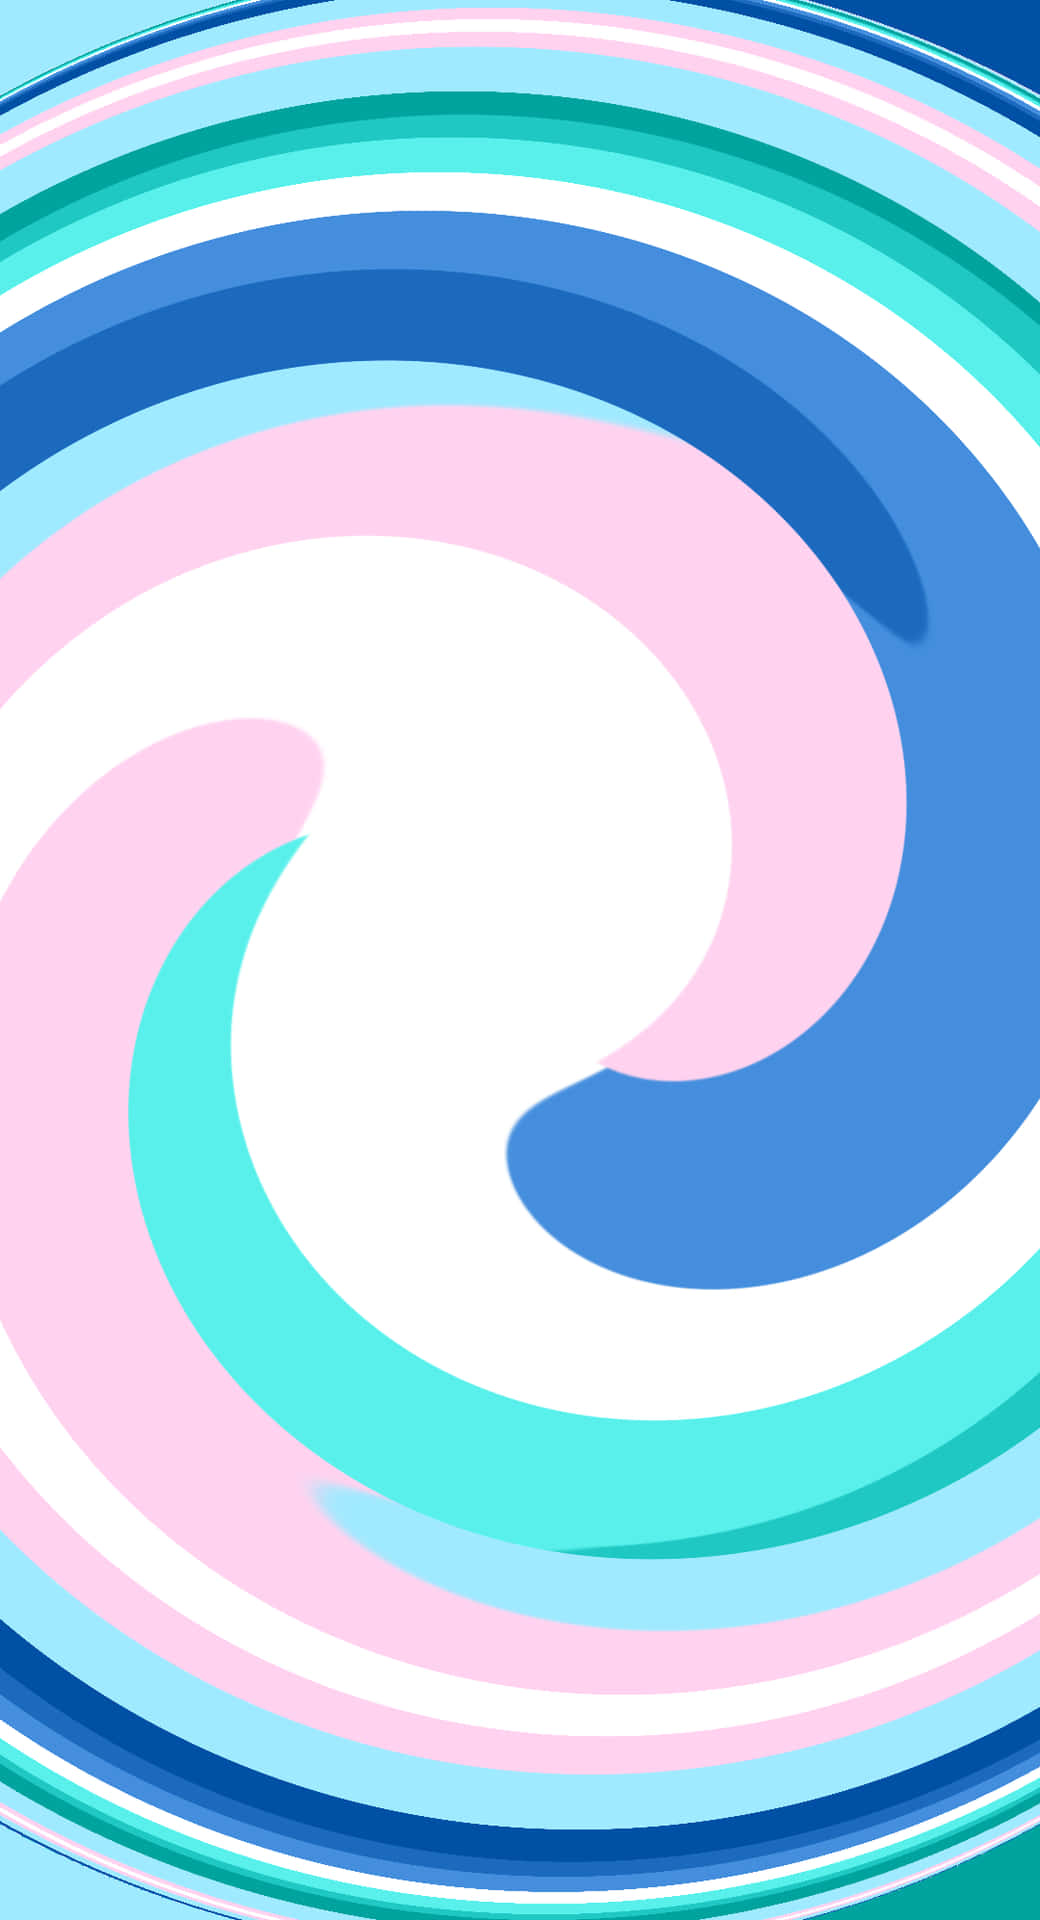 A Swirling Blue And Pink Background Wallpaper